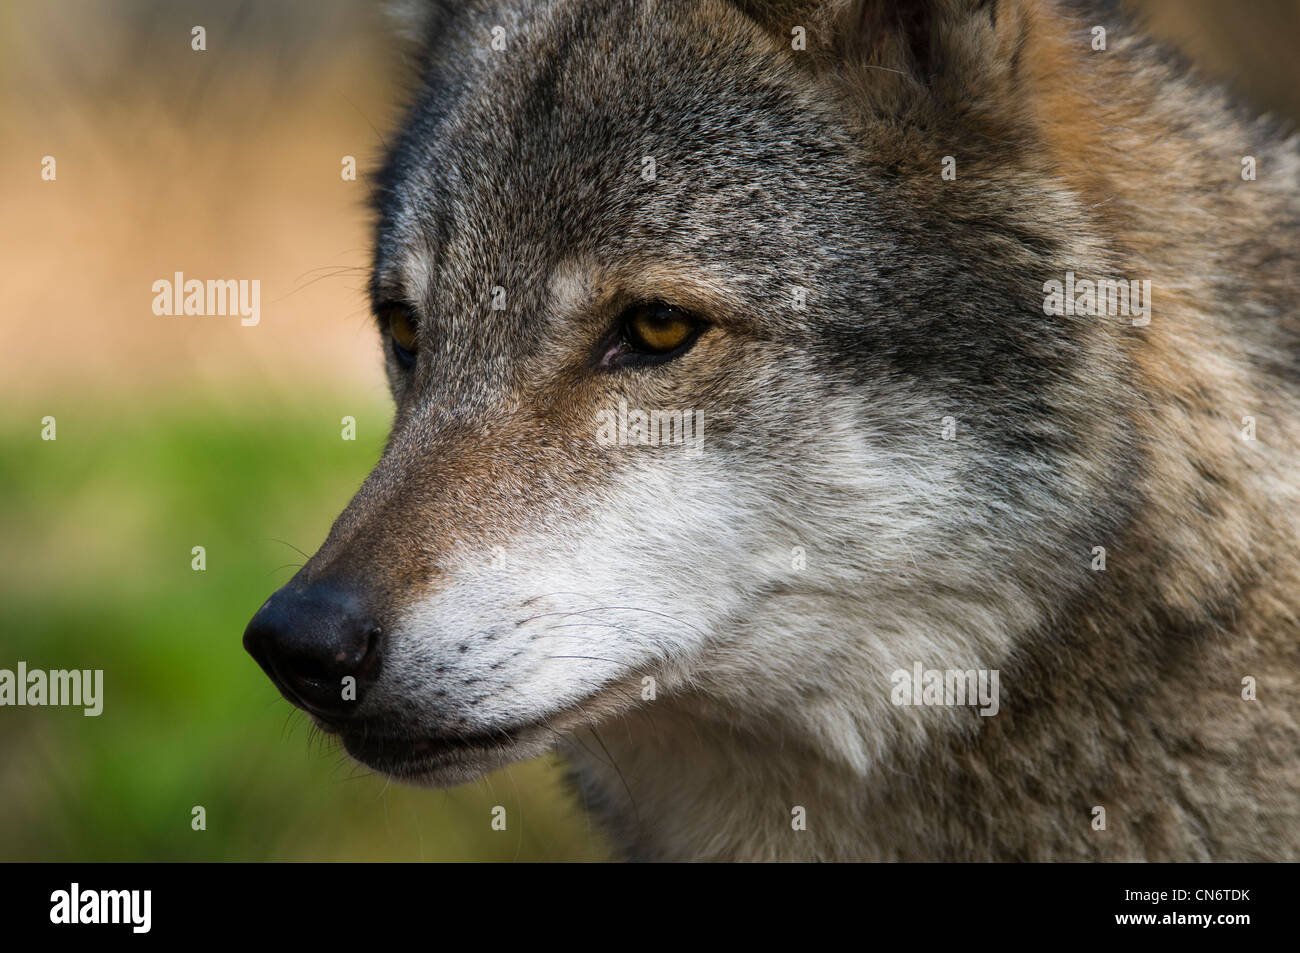 Close-up on the eyes and muzzle of a grey wolf (Canis lupus) at the Wildwood Trust, Herne Bay, Kent. April. Captive animal. Stock Photo